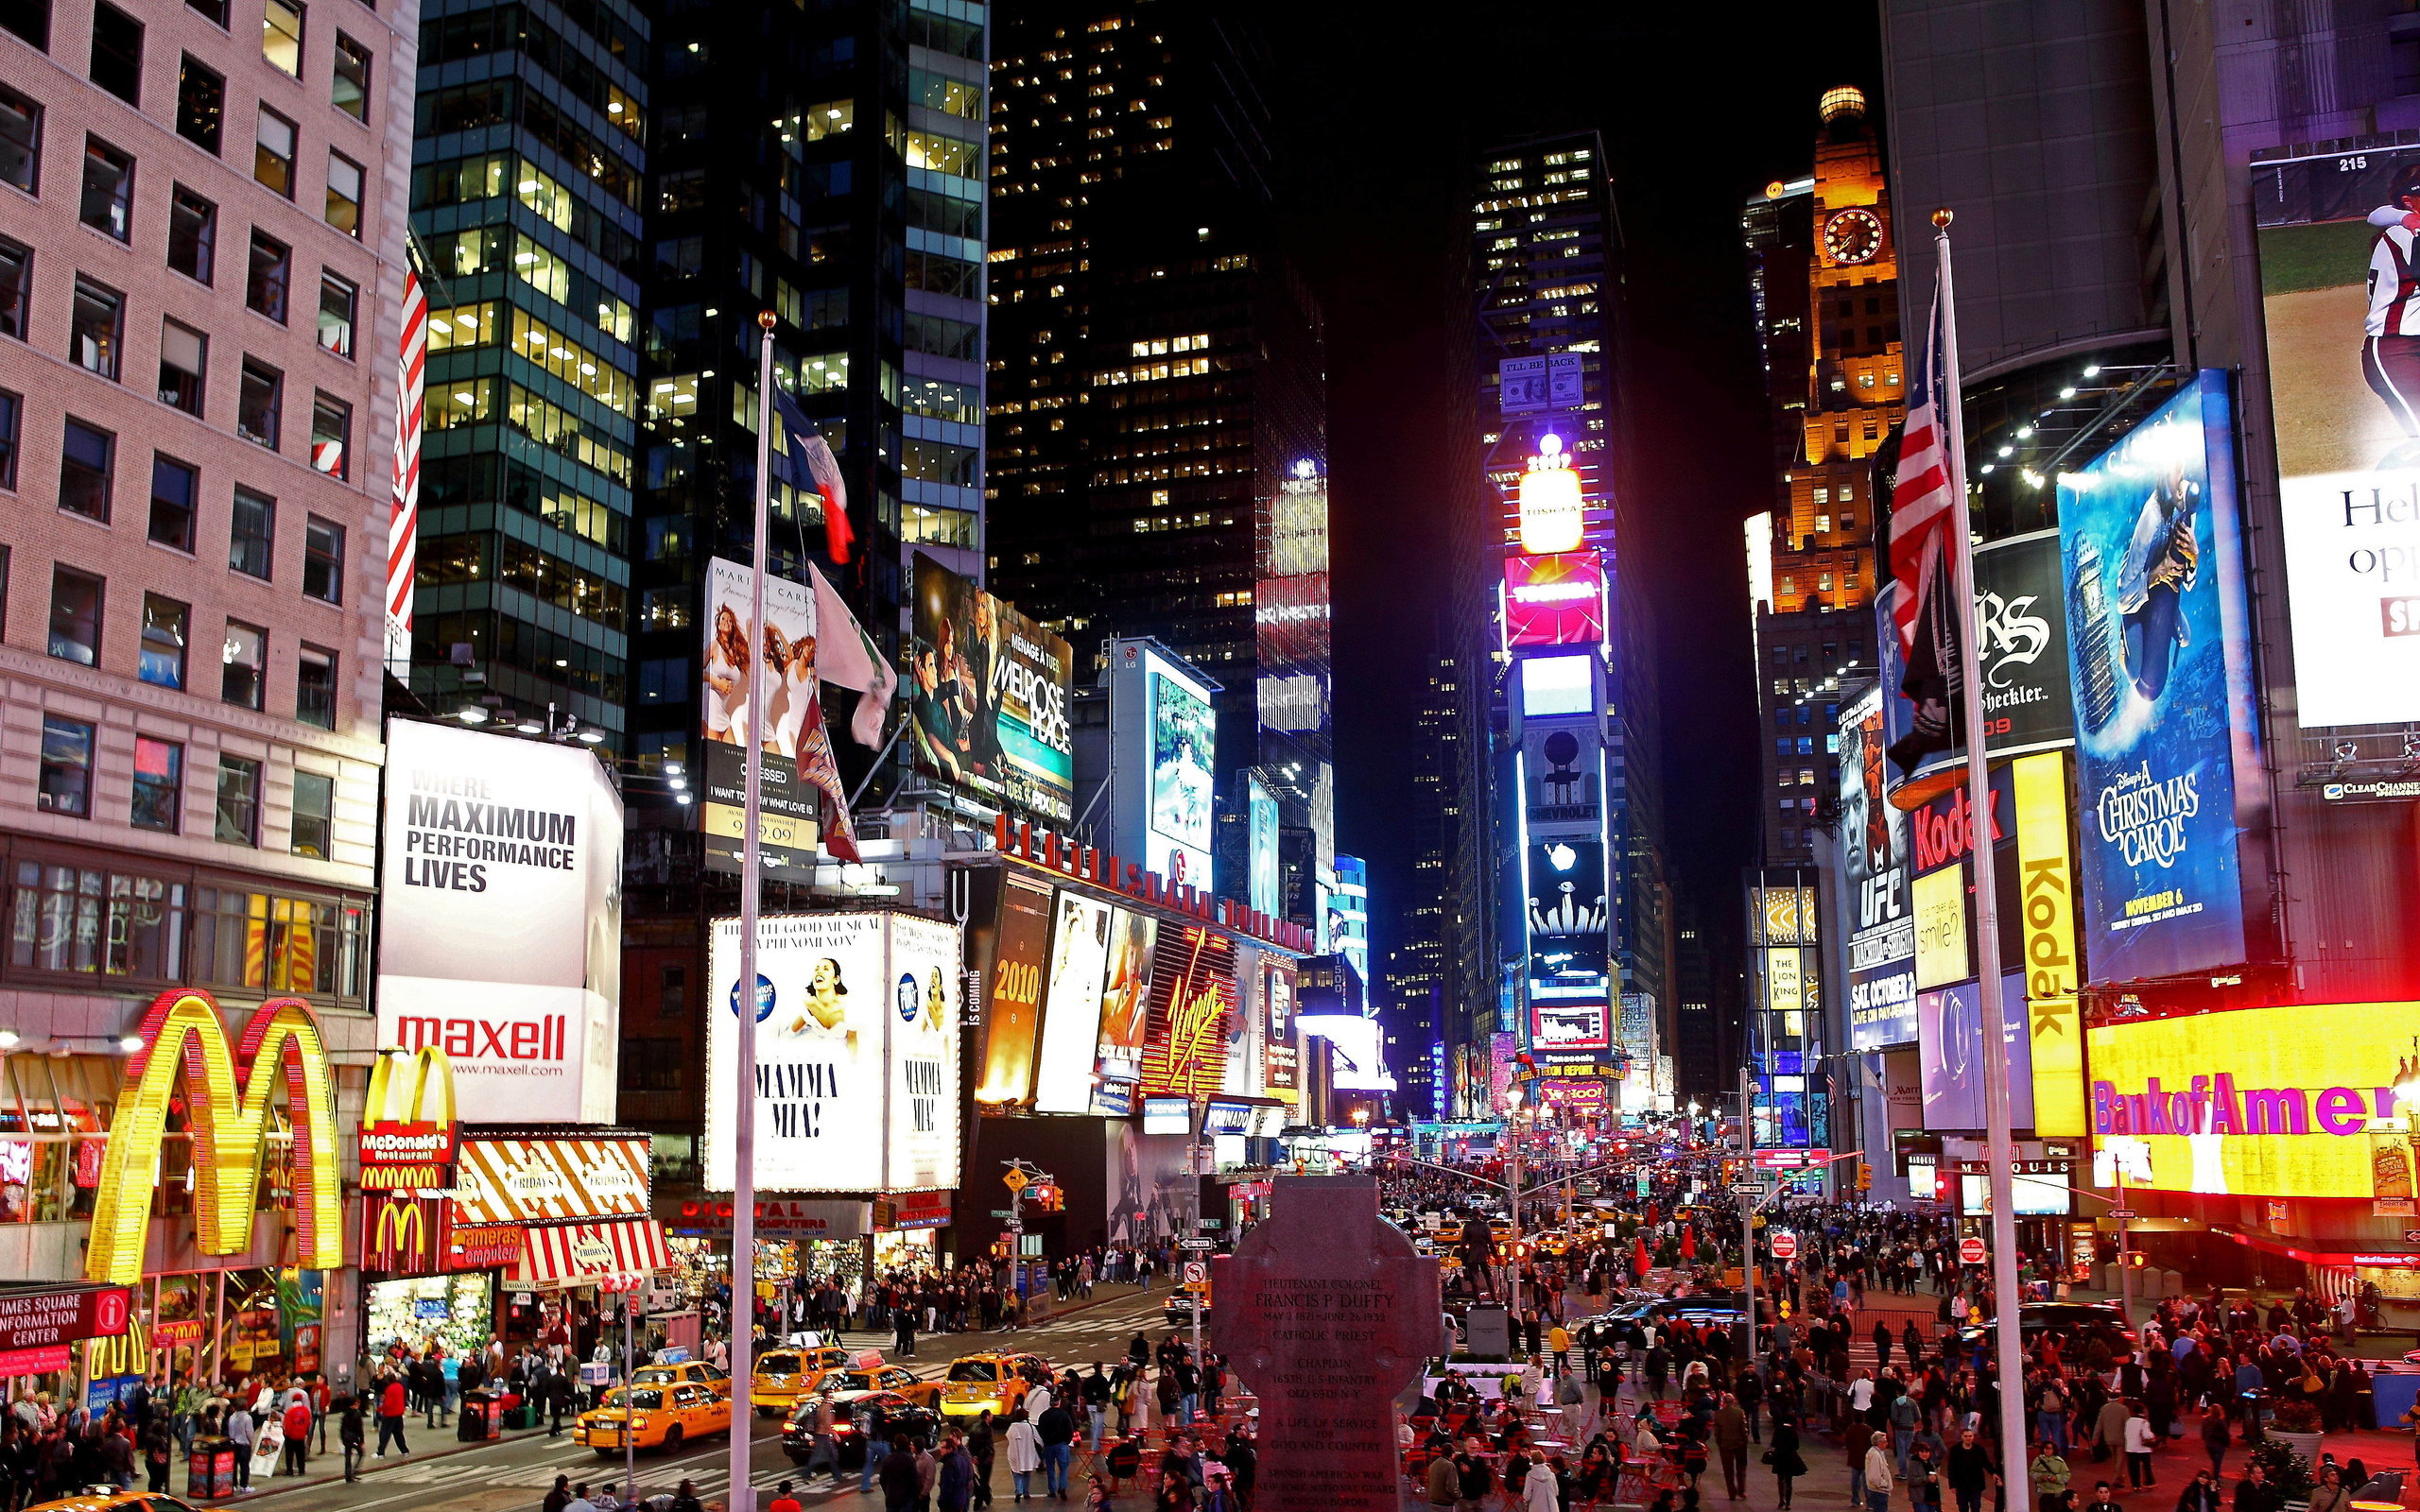 Widescreen Resolutions : 1280x800 1440x900 1680x1050 1920x1200 2560x1600. Facebook Cover : Make My Facbook Cover. Download Times Square, New York at night ...